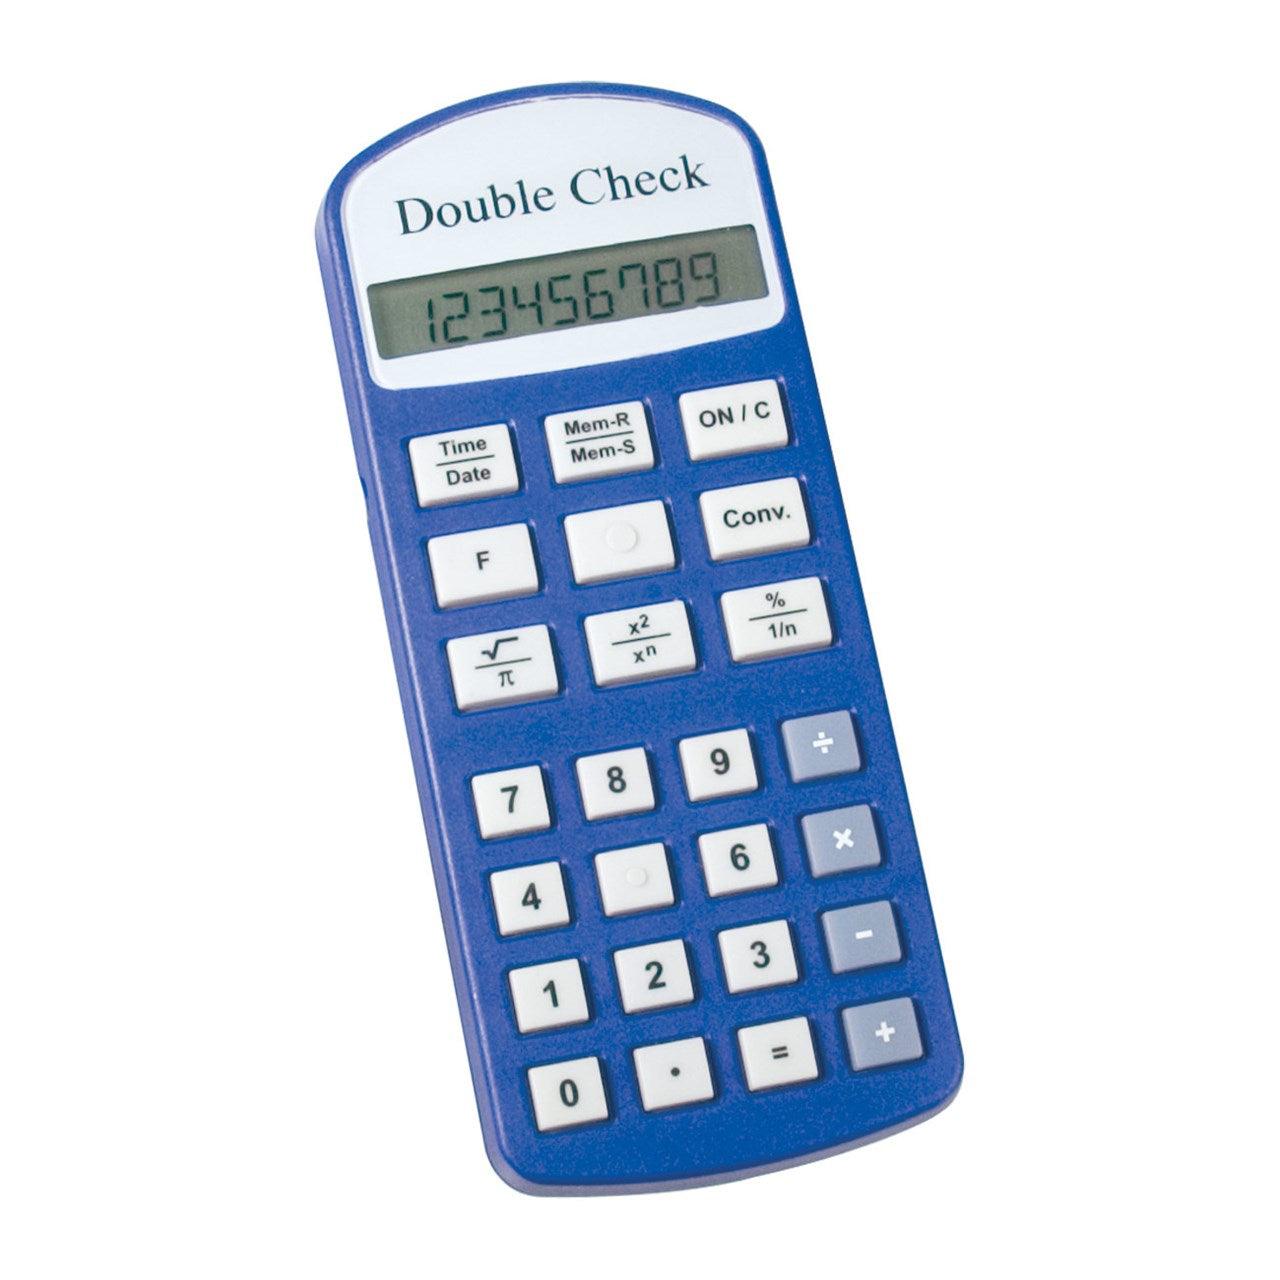 Double Check Talking Financial Calculator - The Low Vision Store